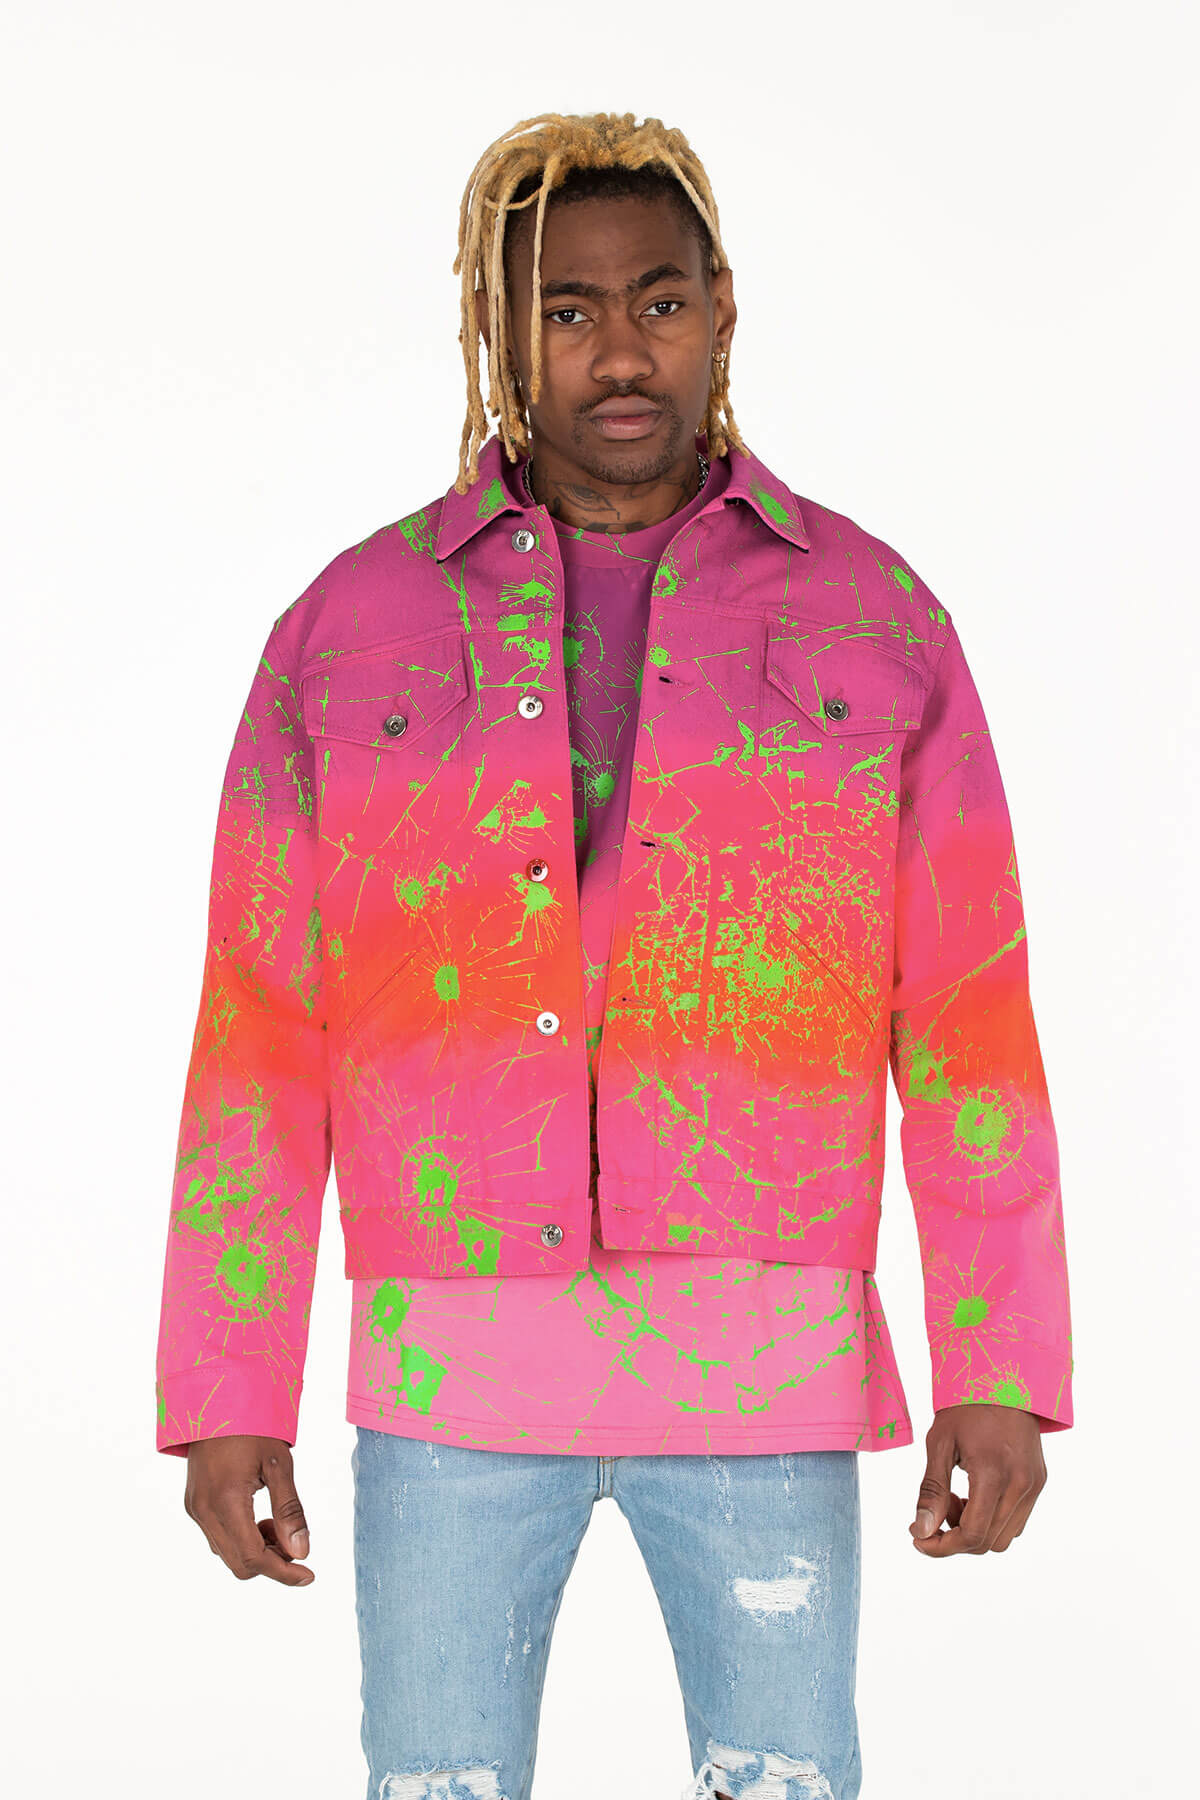 MULTI OMBRE PAX DENIM JACKET HAND CRAFTED - MJB